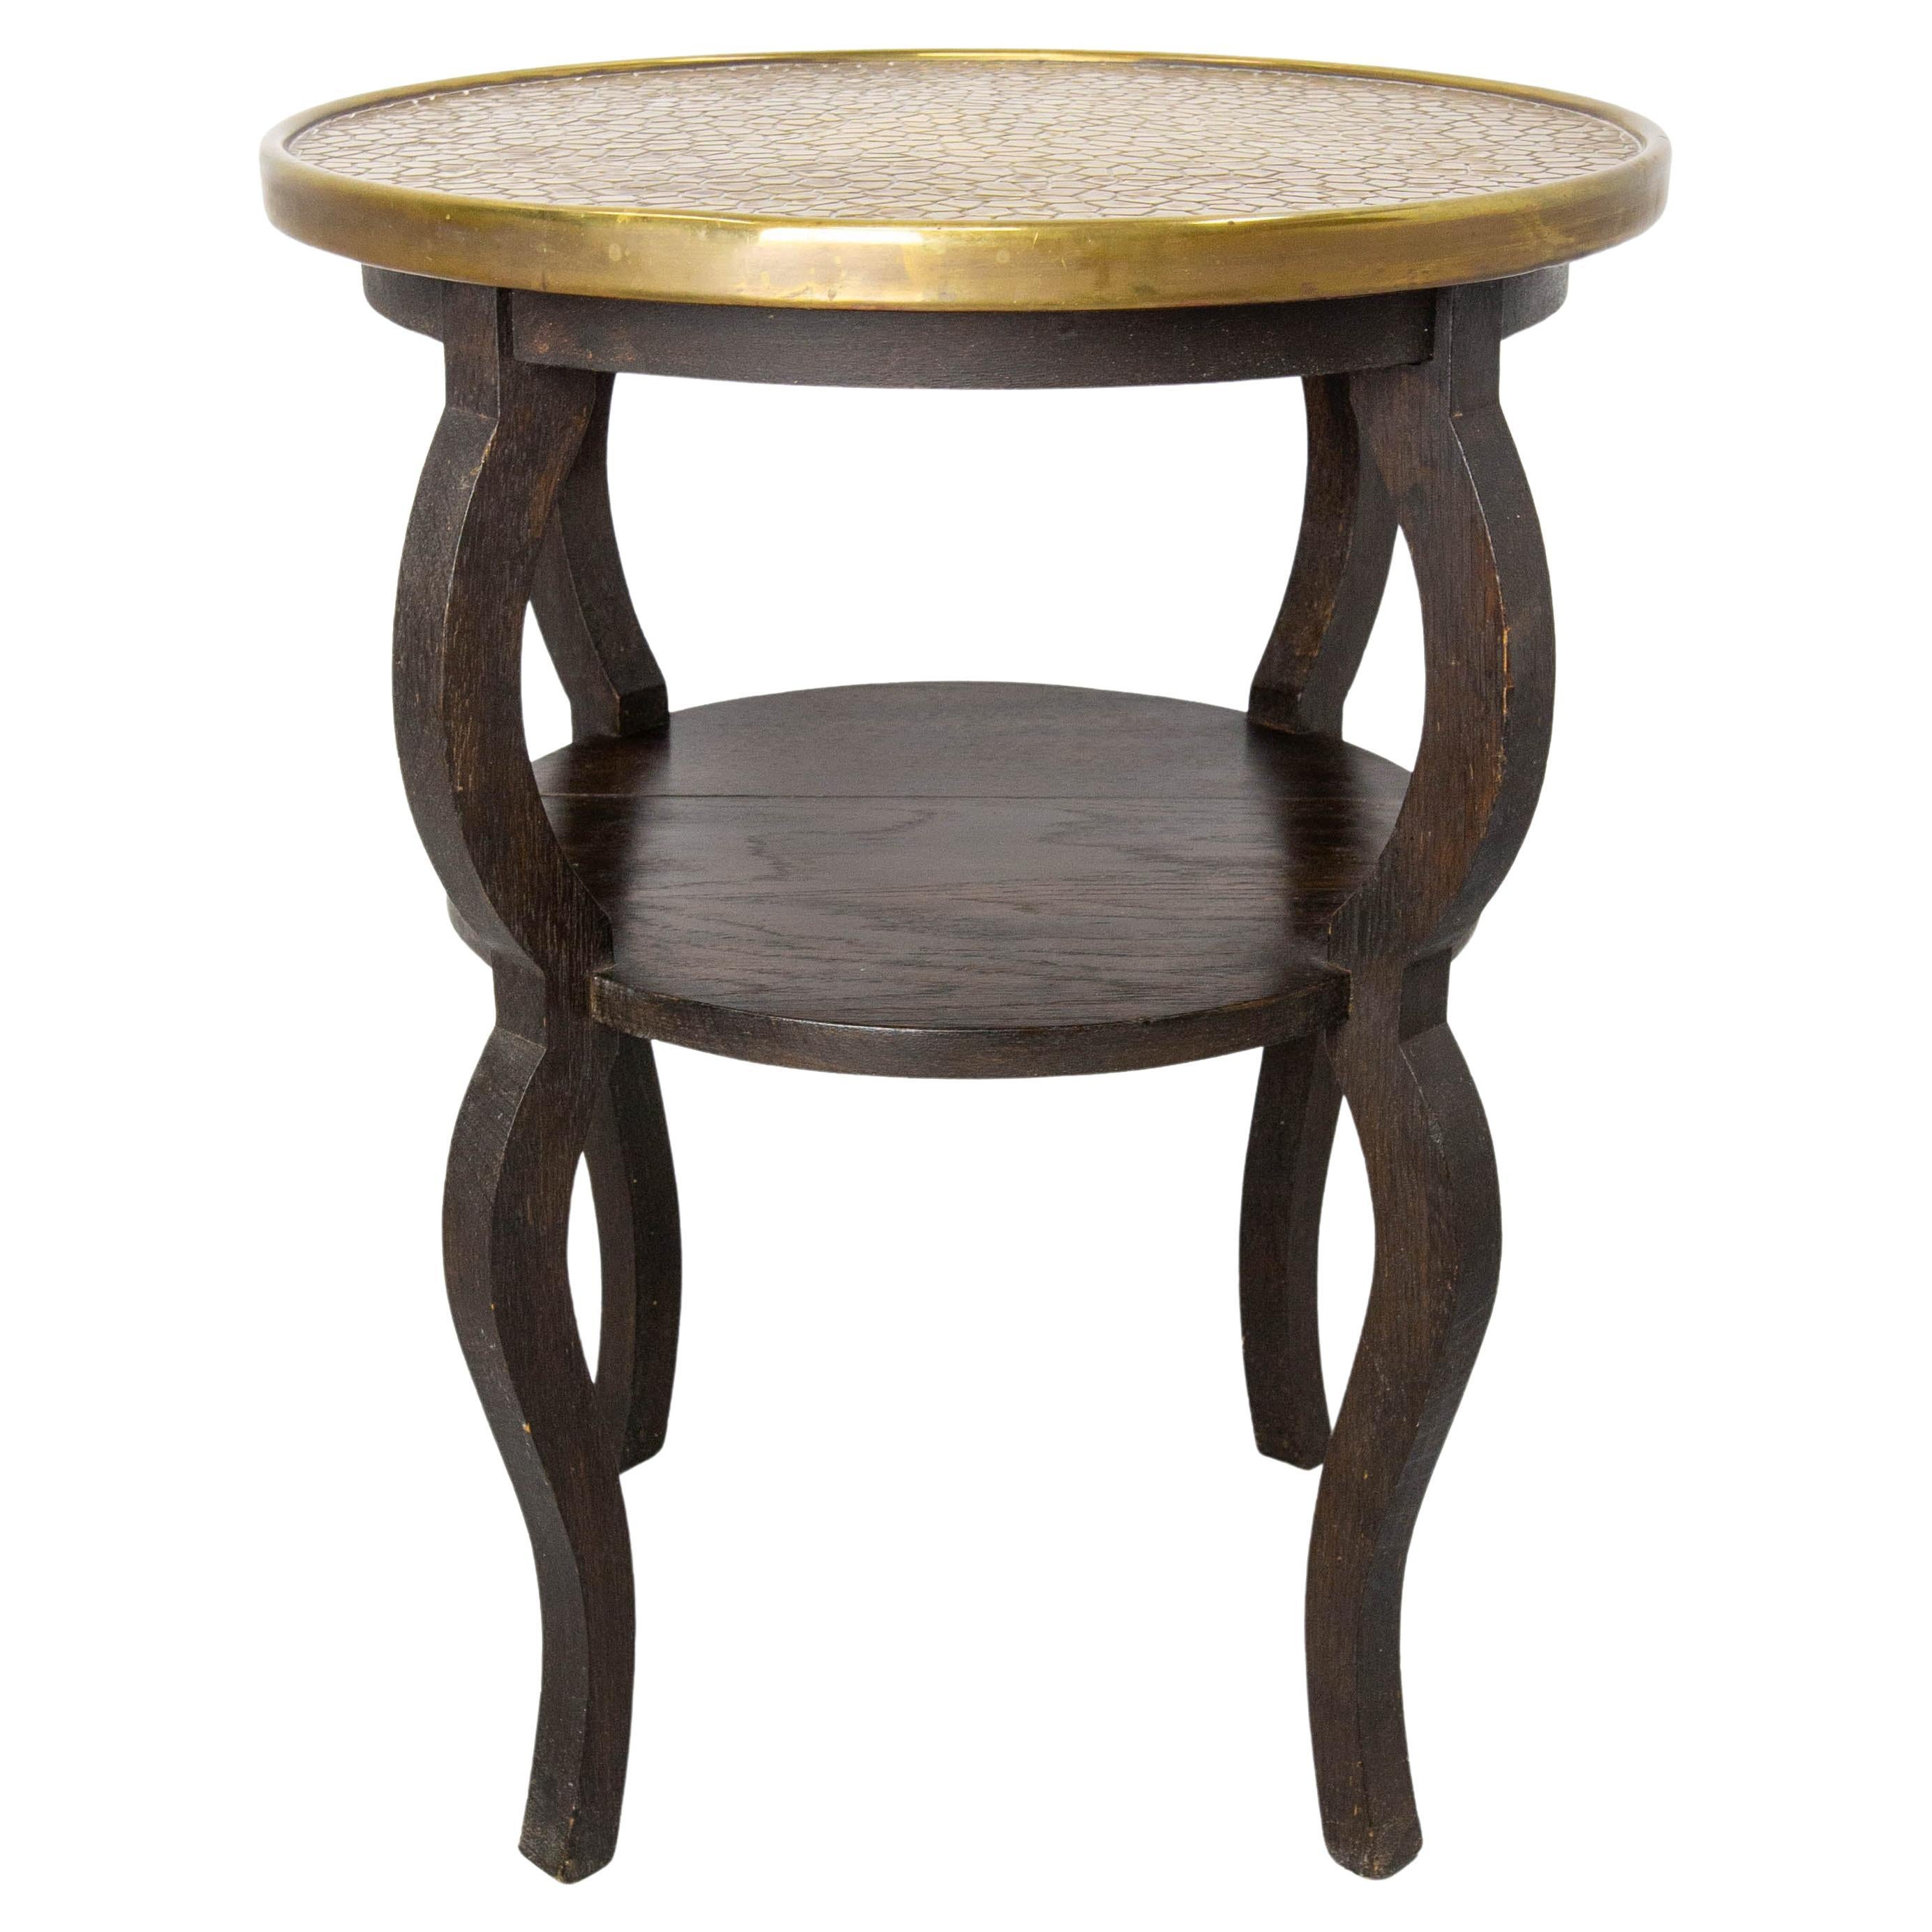 French Chestnut & Copper Table Sellette Side Table or Coffee Table, circa 1940 For Sale